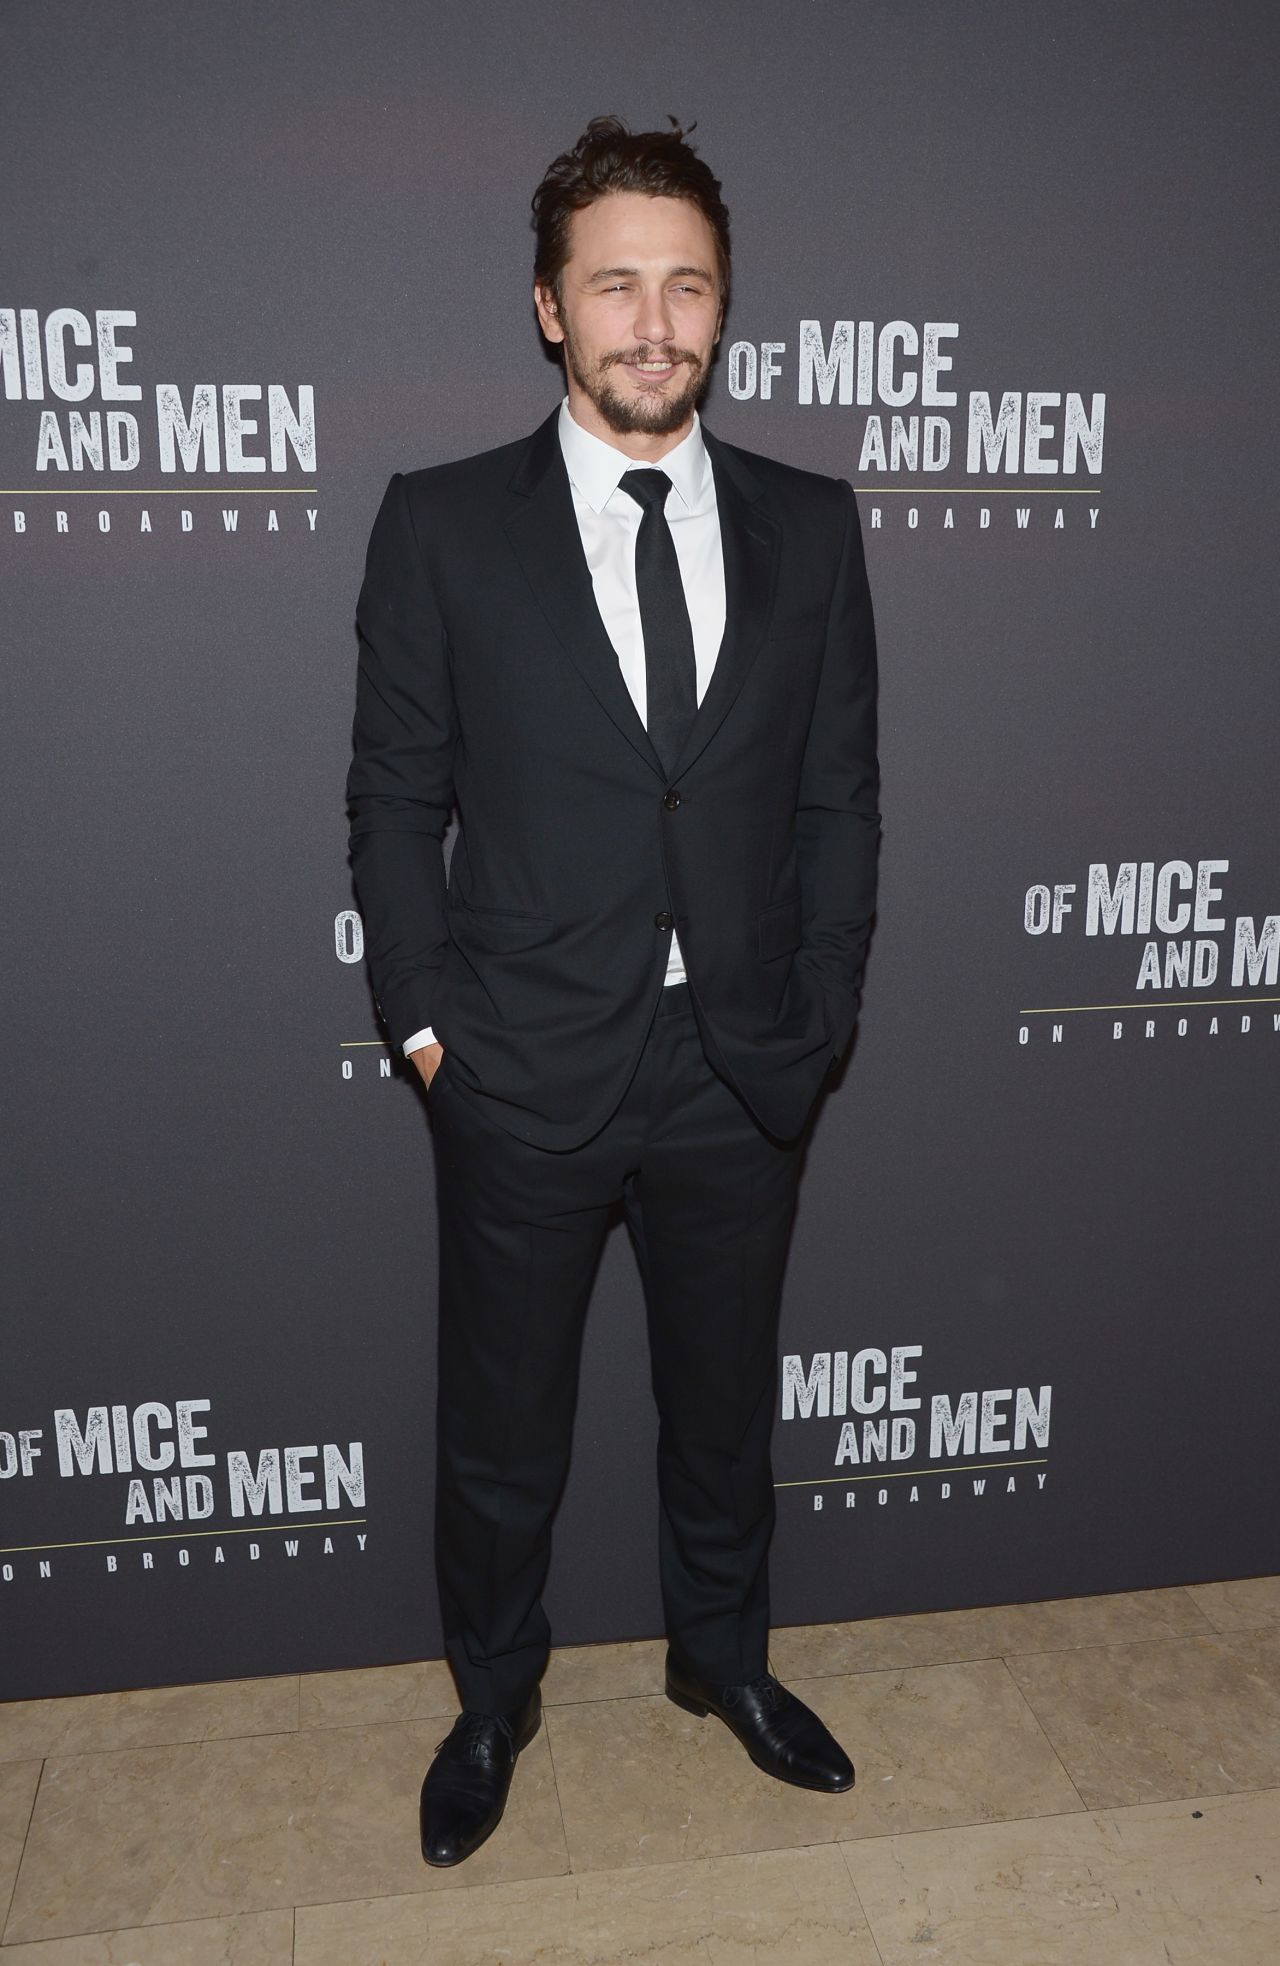 James Franco criticized The New York Times' theater critic, Ben Brantley, over a lukewarm review of the "Of Mice and Men" Broadway revival in which Franco stars. "Brantley is such a little b****," the actor said in an April Instagram takedown that he later removed -- but <a href="https://twitter.com/rilaws/status/456785693105065984/photo/1" target="_blank" target="_blank">not before it was screengrabbed for posterity</a>. 